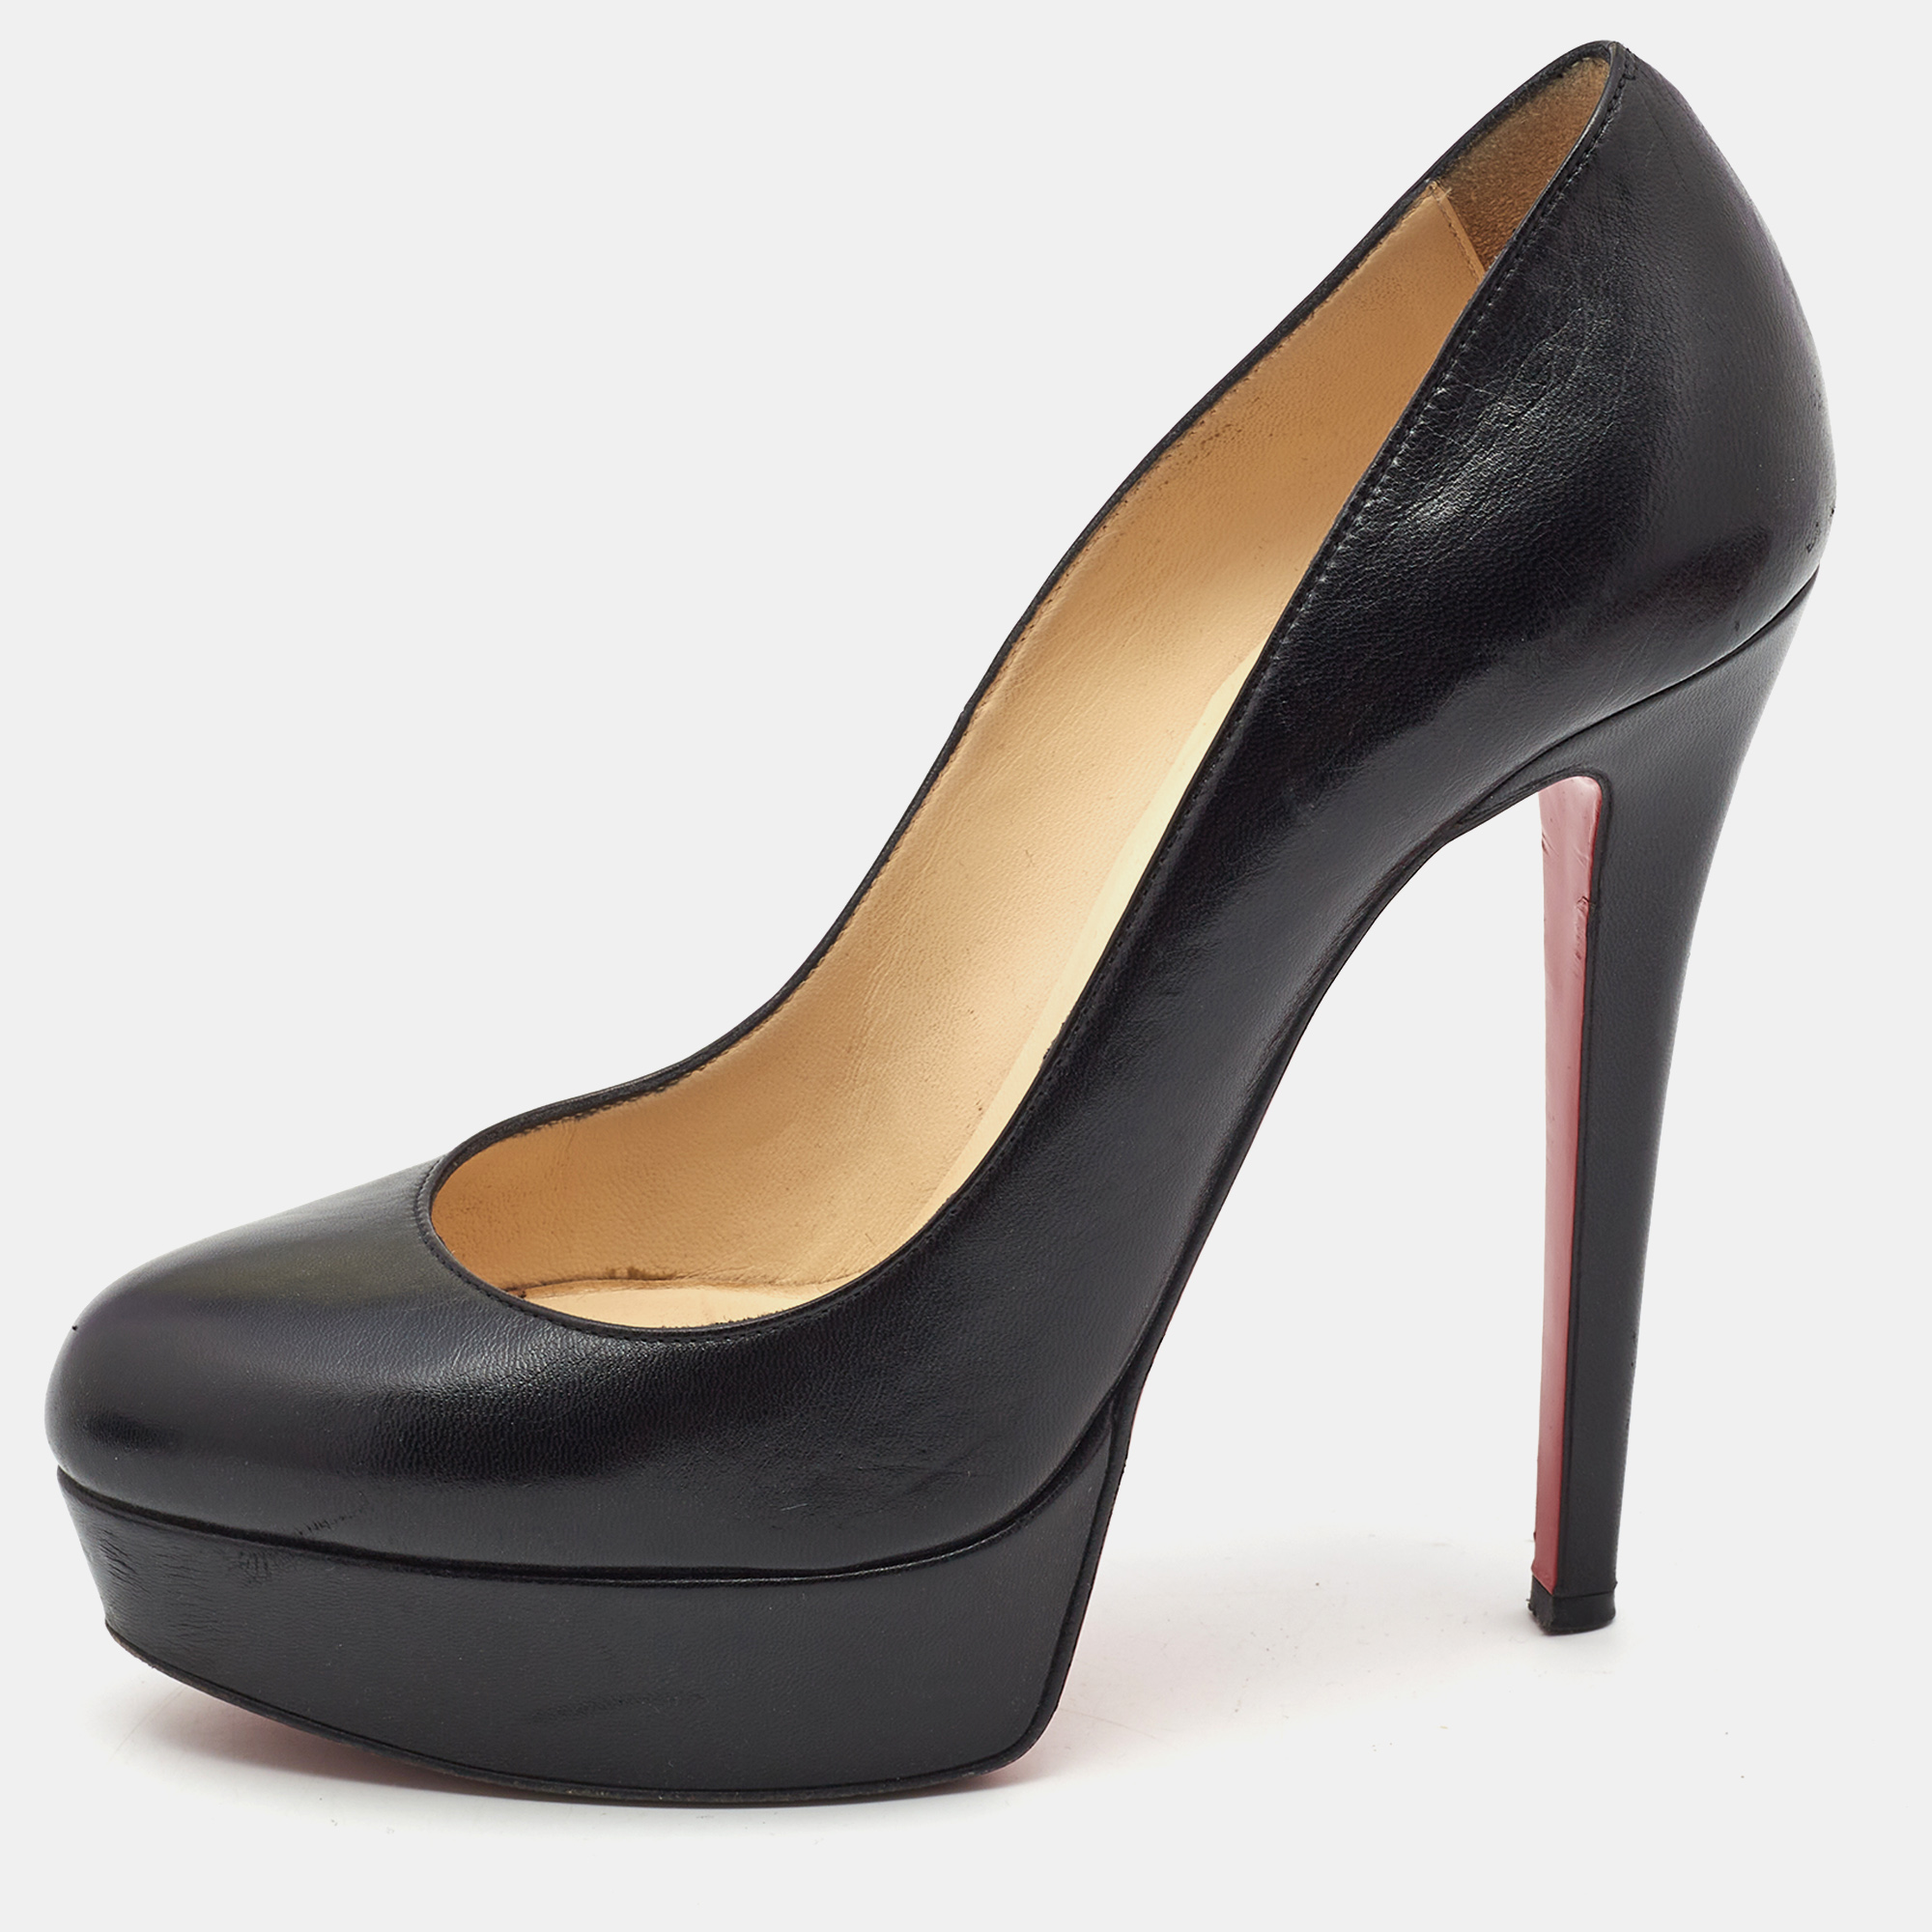 Pre-owned Christian Louboutin Black Leather Bianca Pumps Size 37